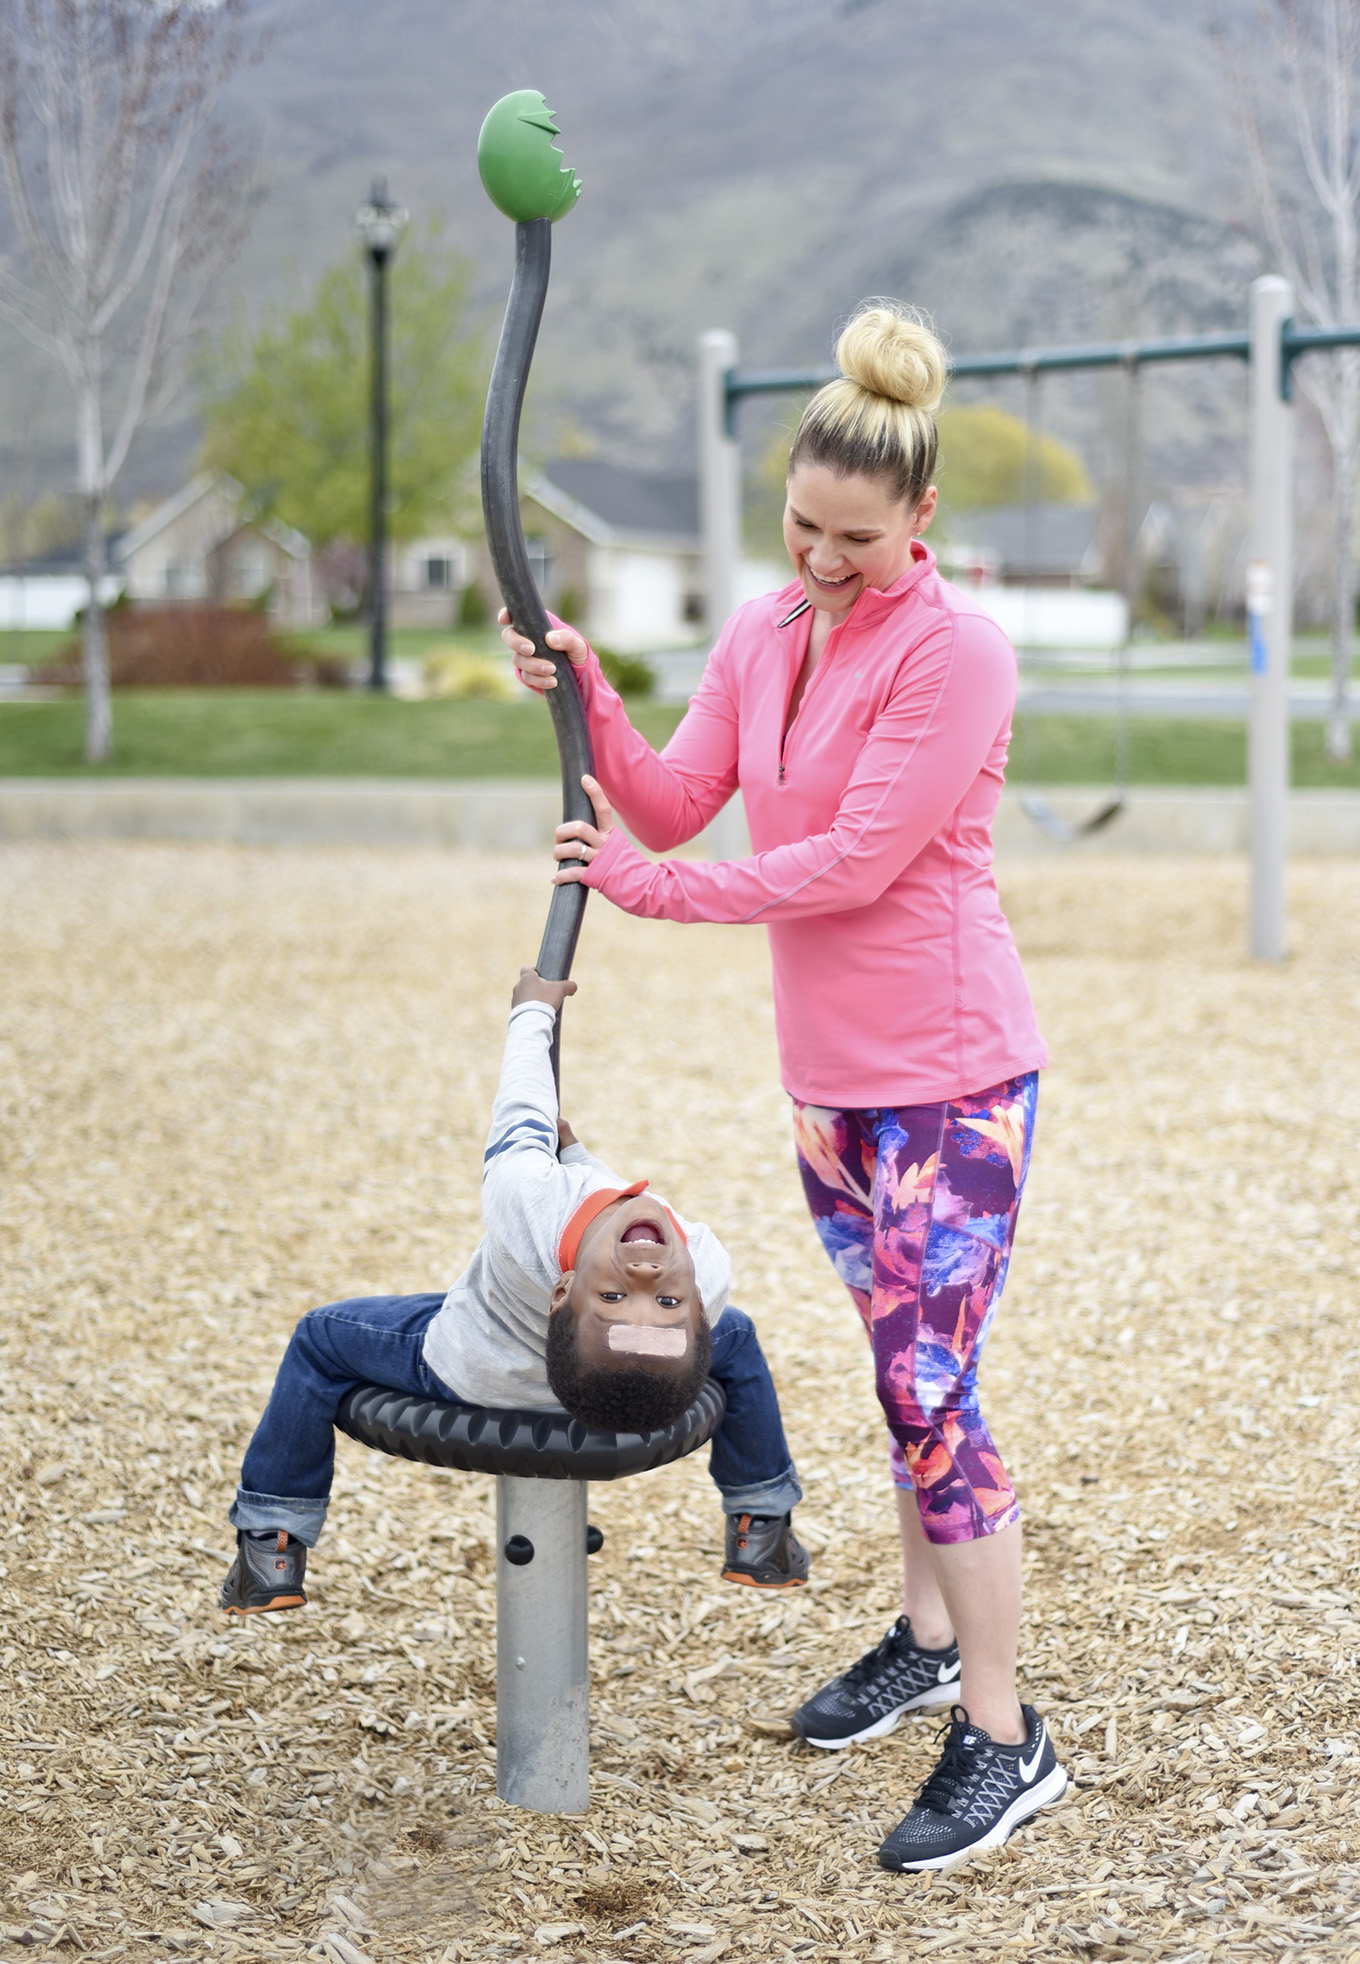 This park workout is a quick, challenging circuit you can squeeze in between swings, slides, and monkey bars. No equipment needed!